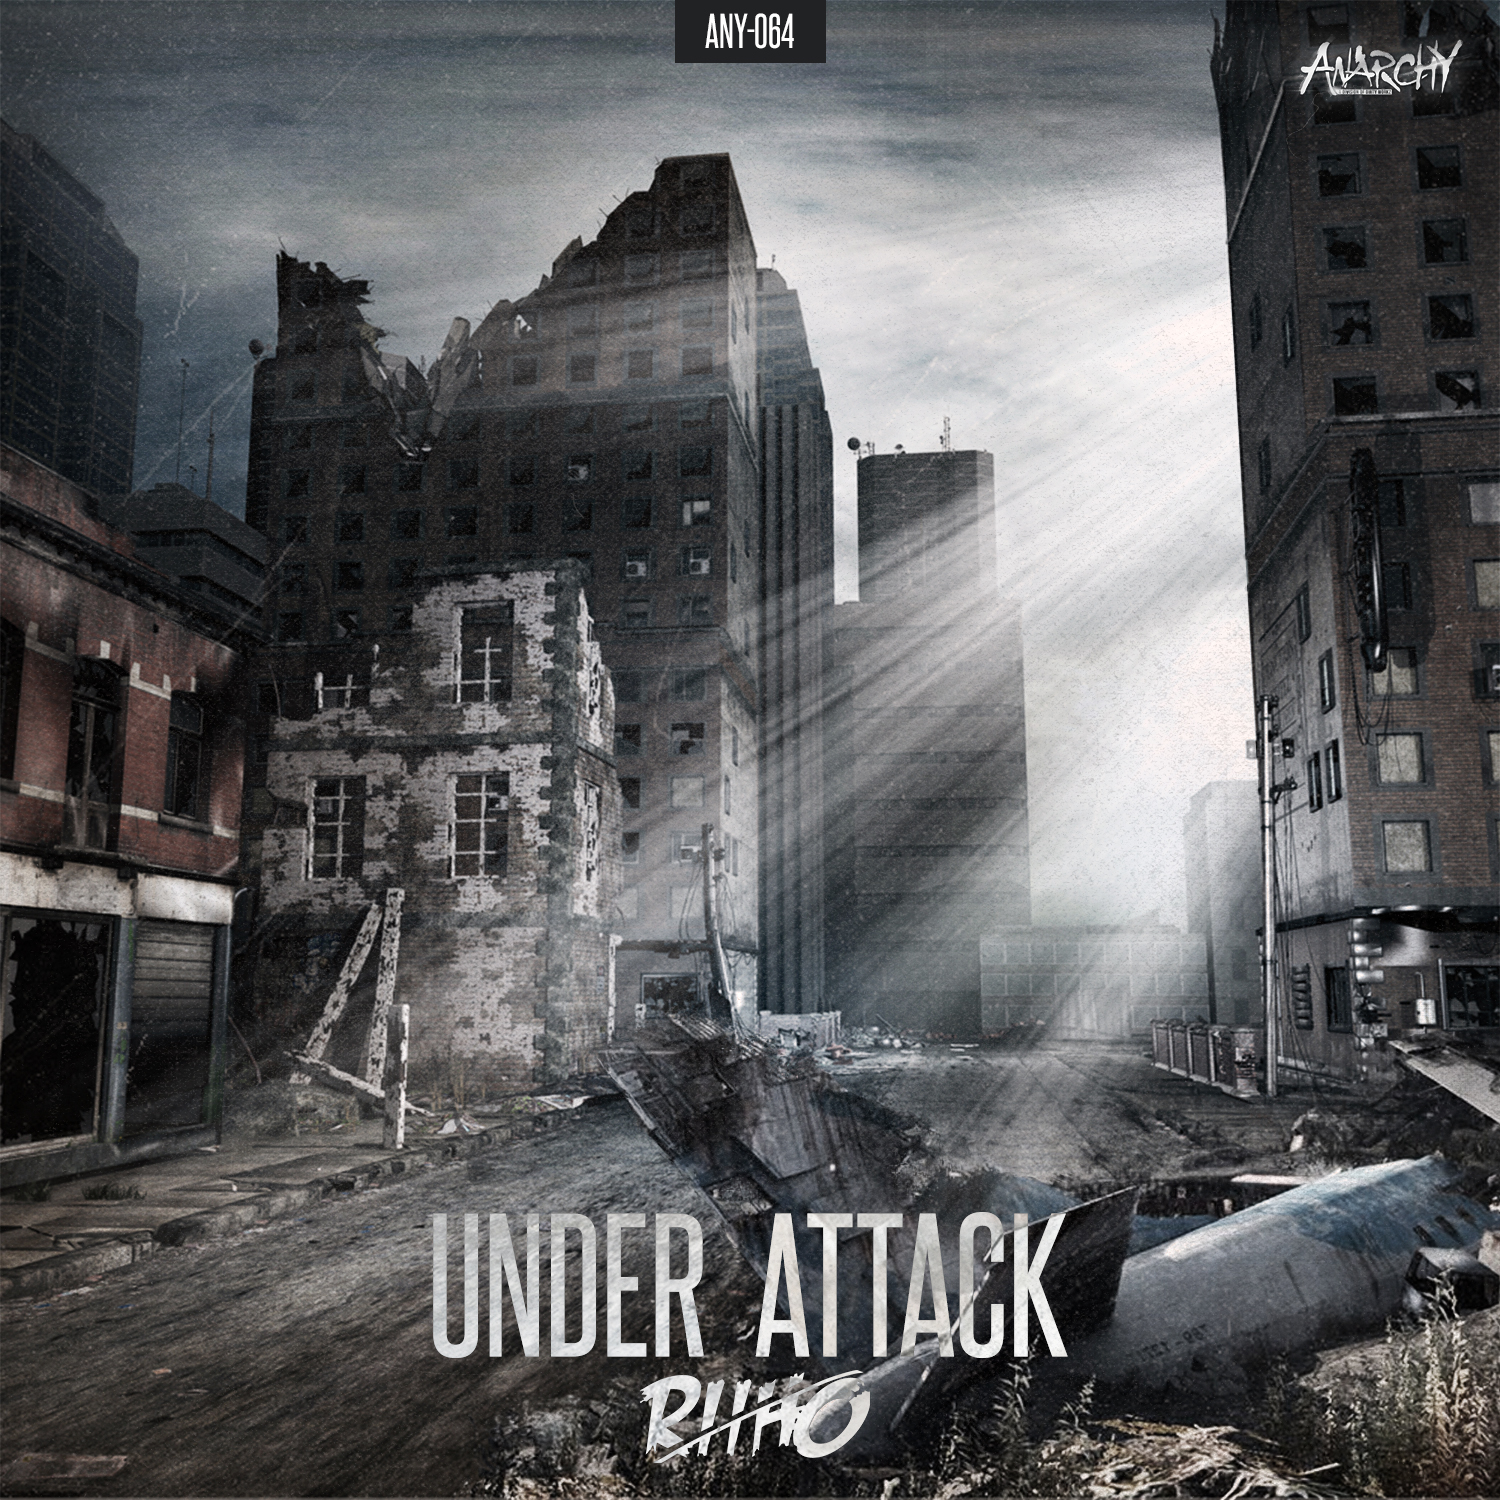 Riiho - Under Attack [ANARCHY] ANY064